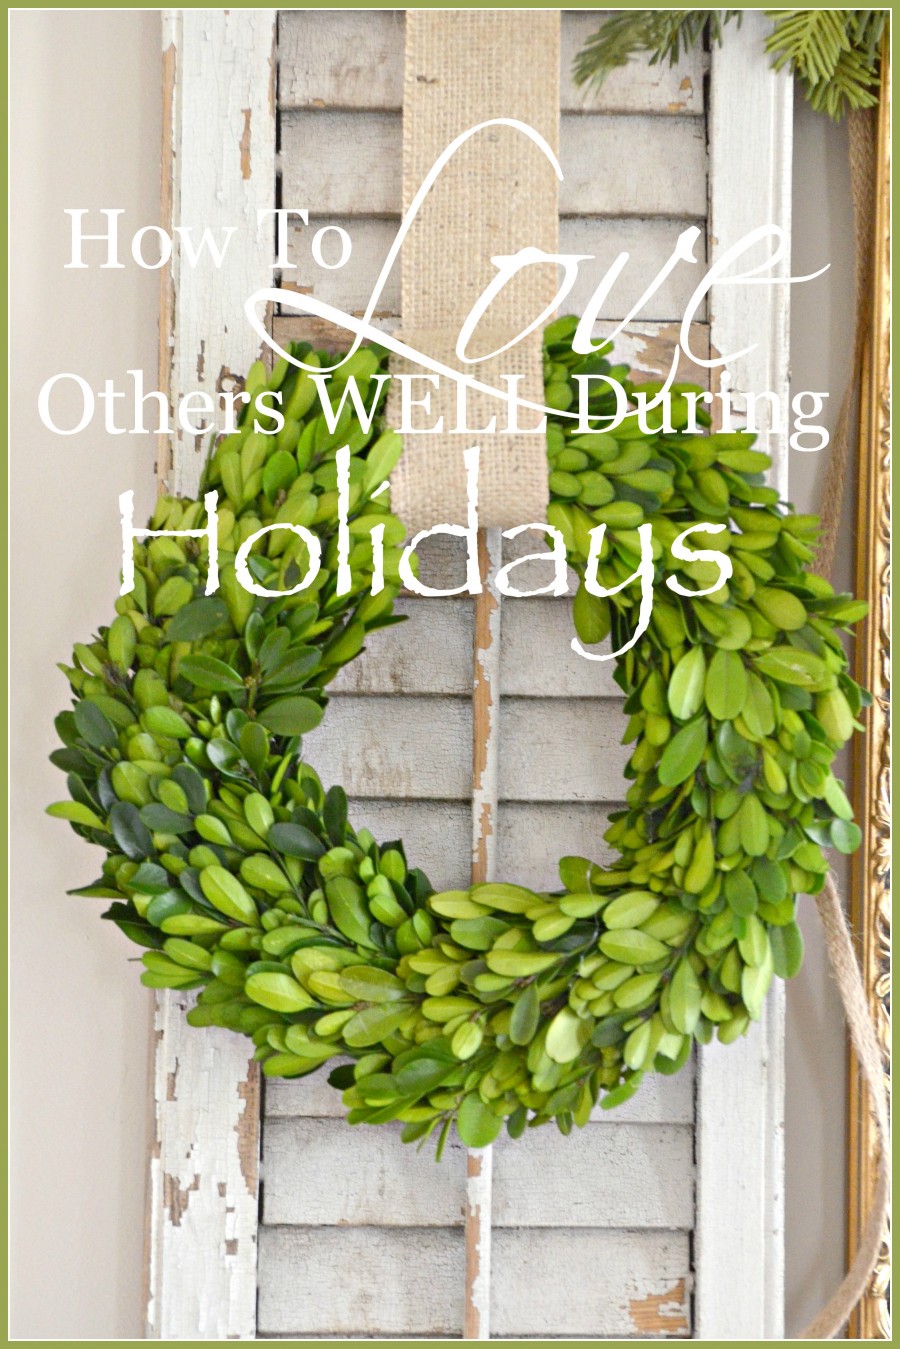 HOW TO LOVE OTHERS WELL DURING THE HOLIDAYS